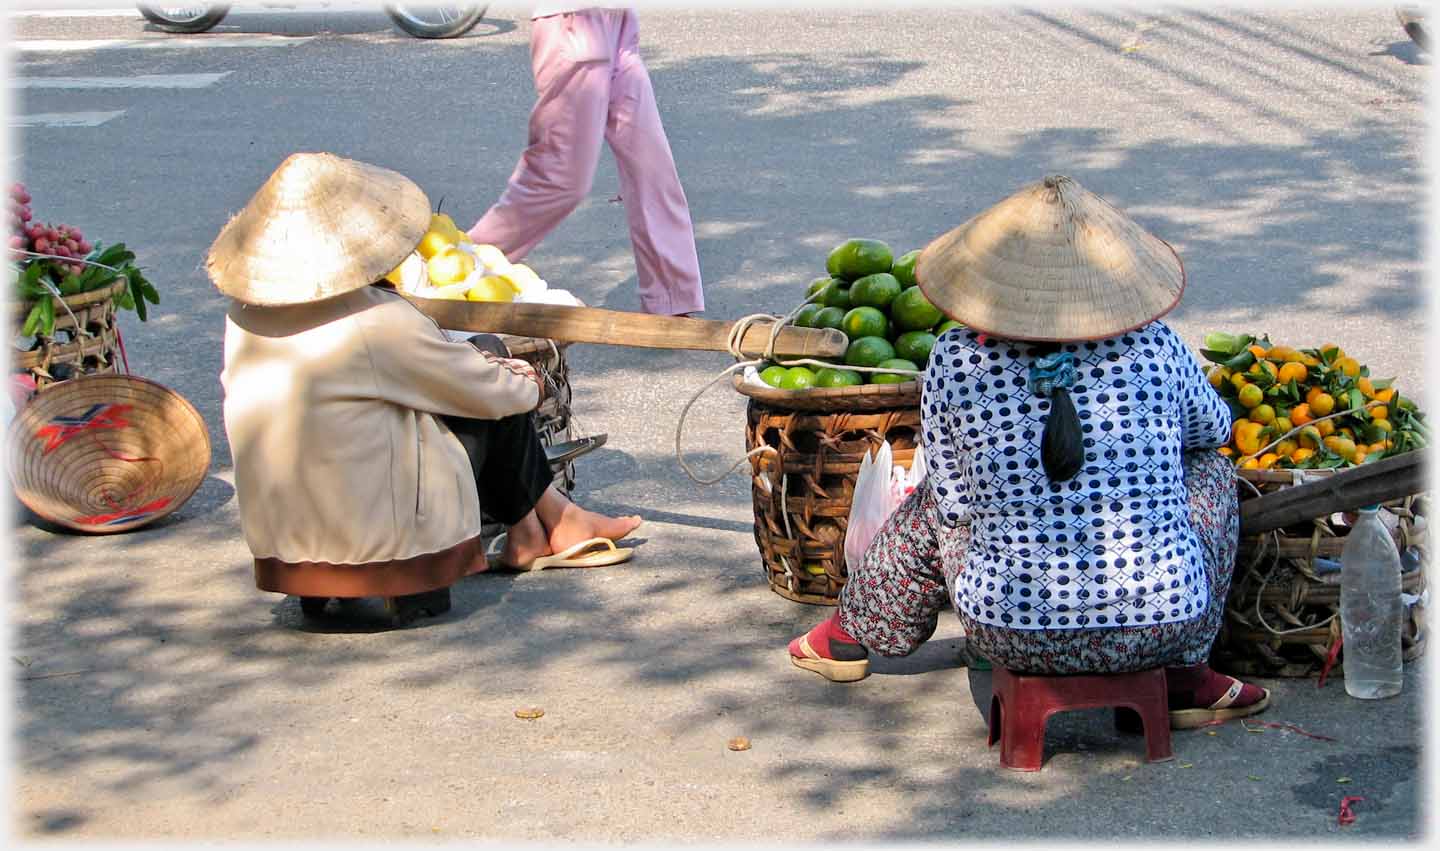 Rear view of two women sitting at roadside with the baskets of their panniers.